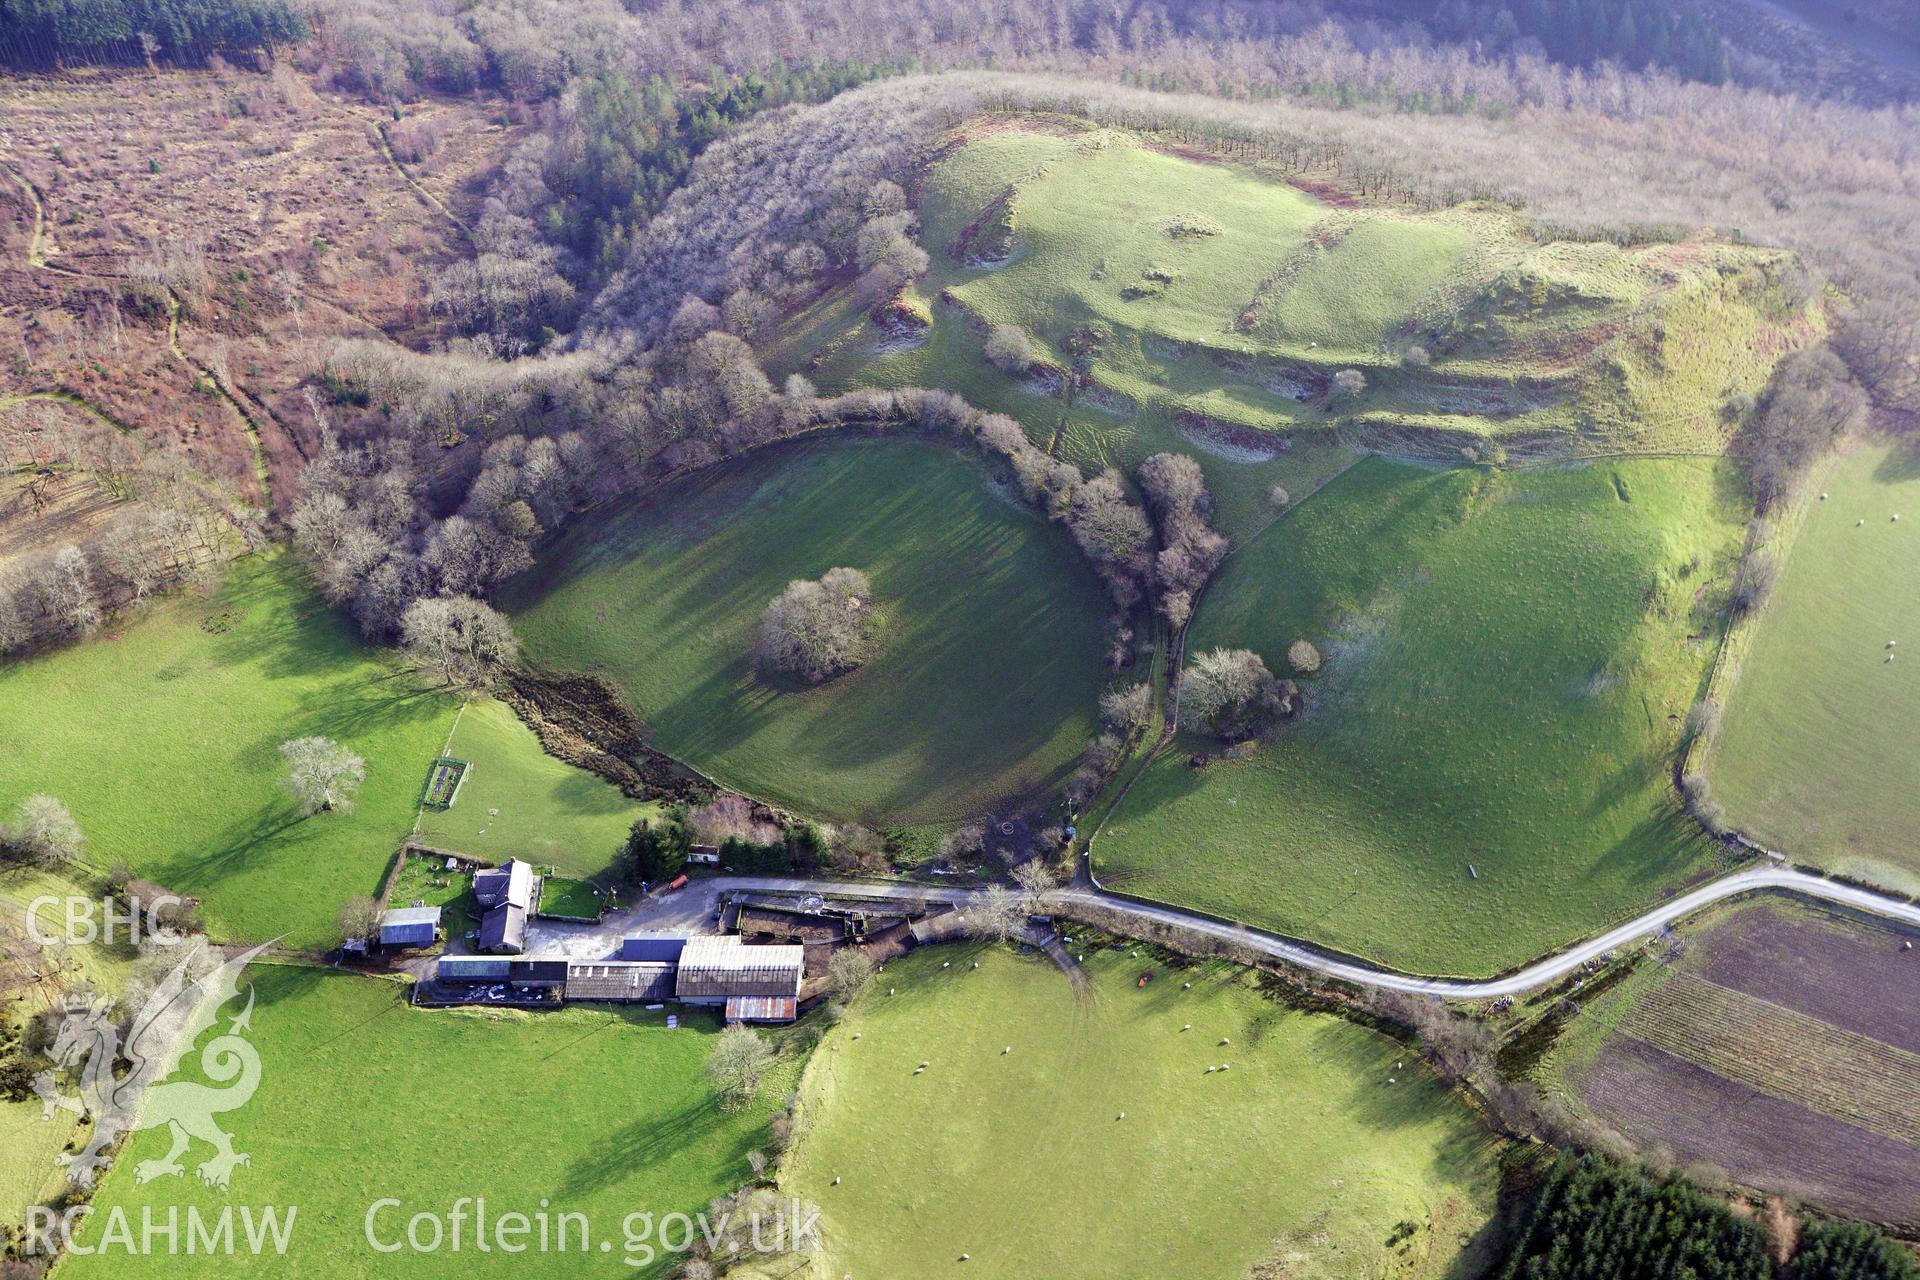 RCAHMW colour oblique photograph of Castell Grogwynion. Taken by Toby Driver on 07/02/2012.